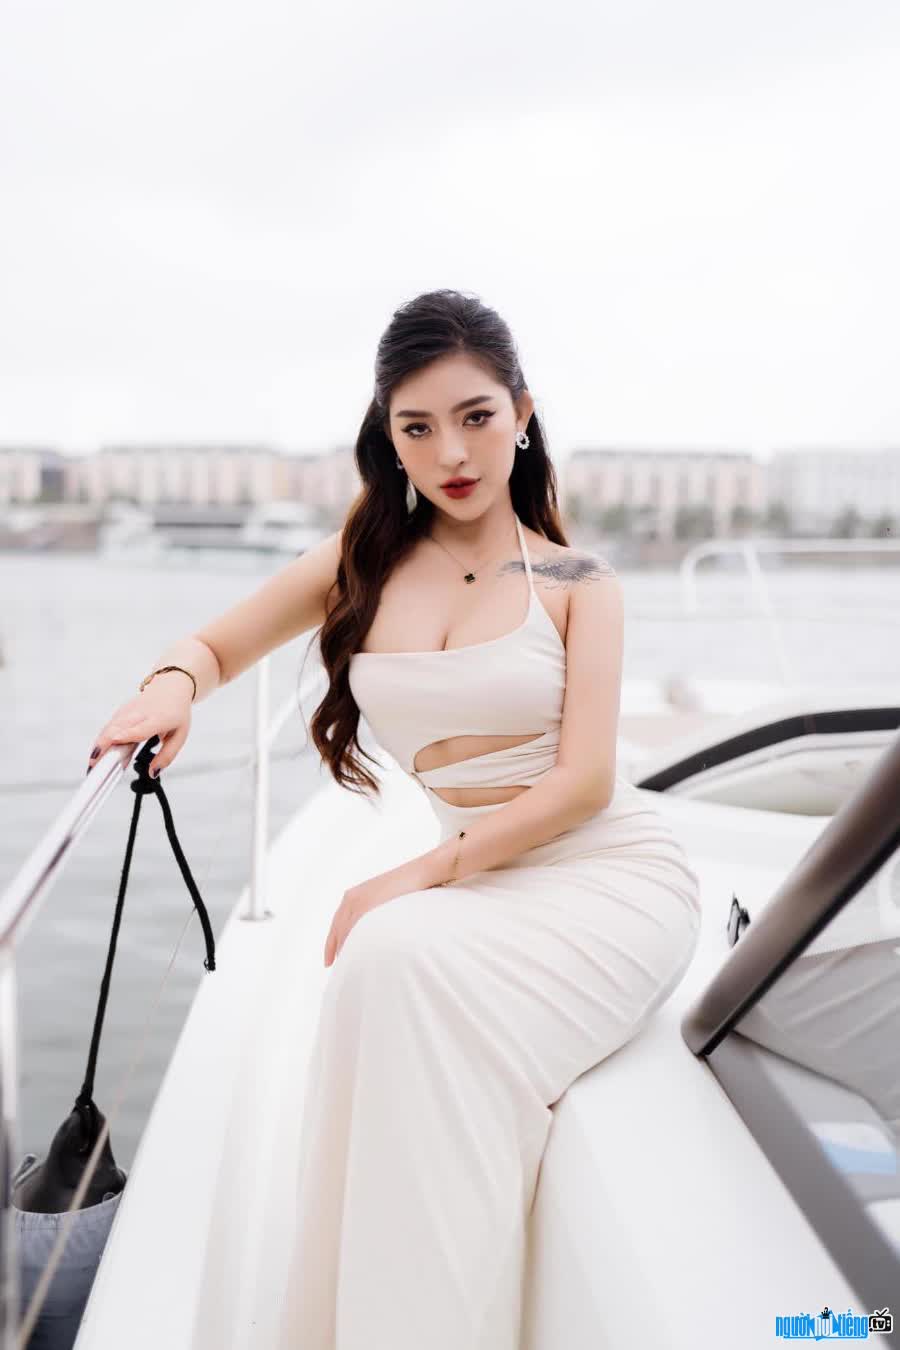 pristinely beautiful in a long white dress